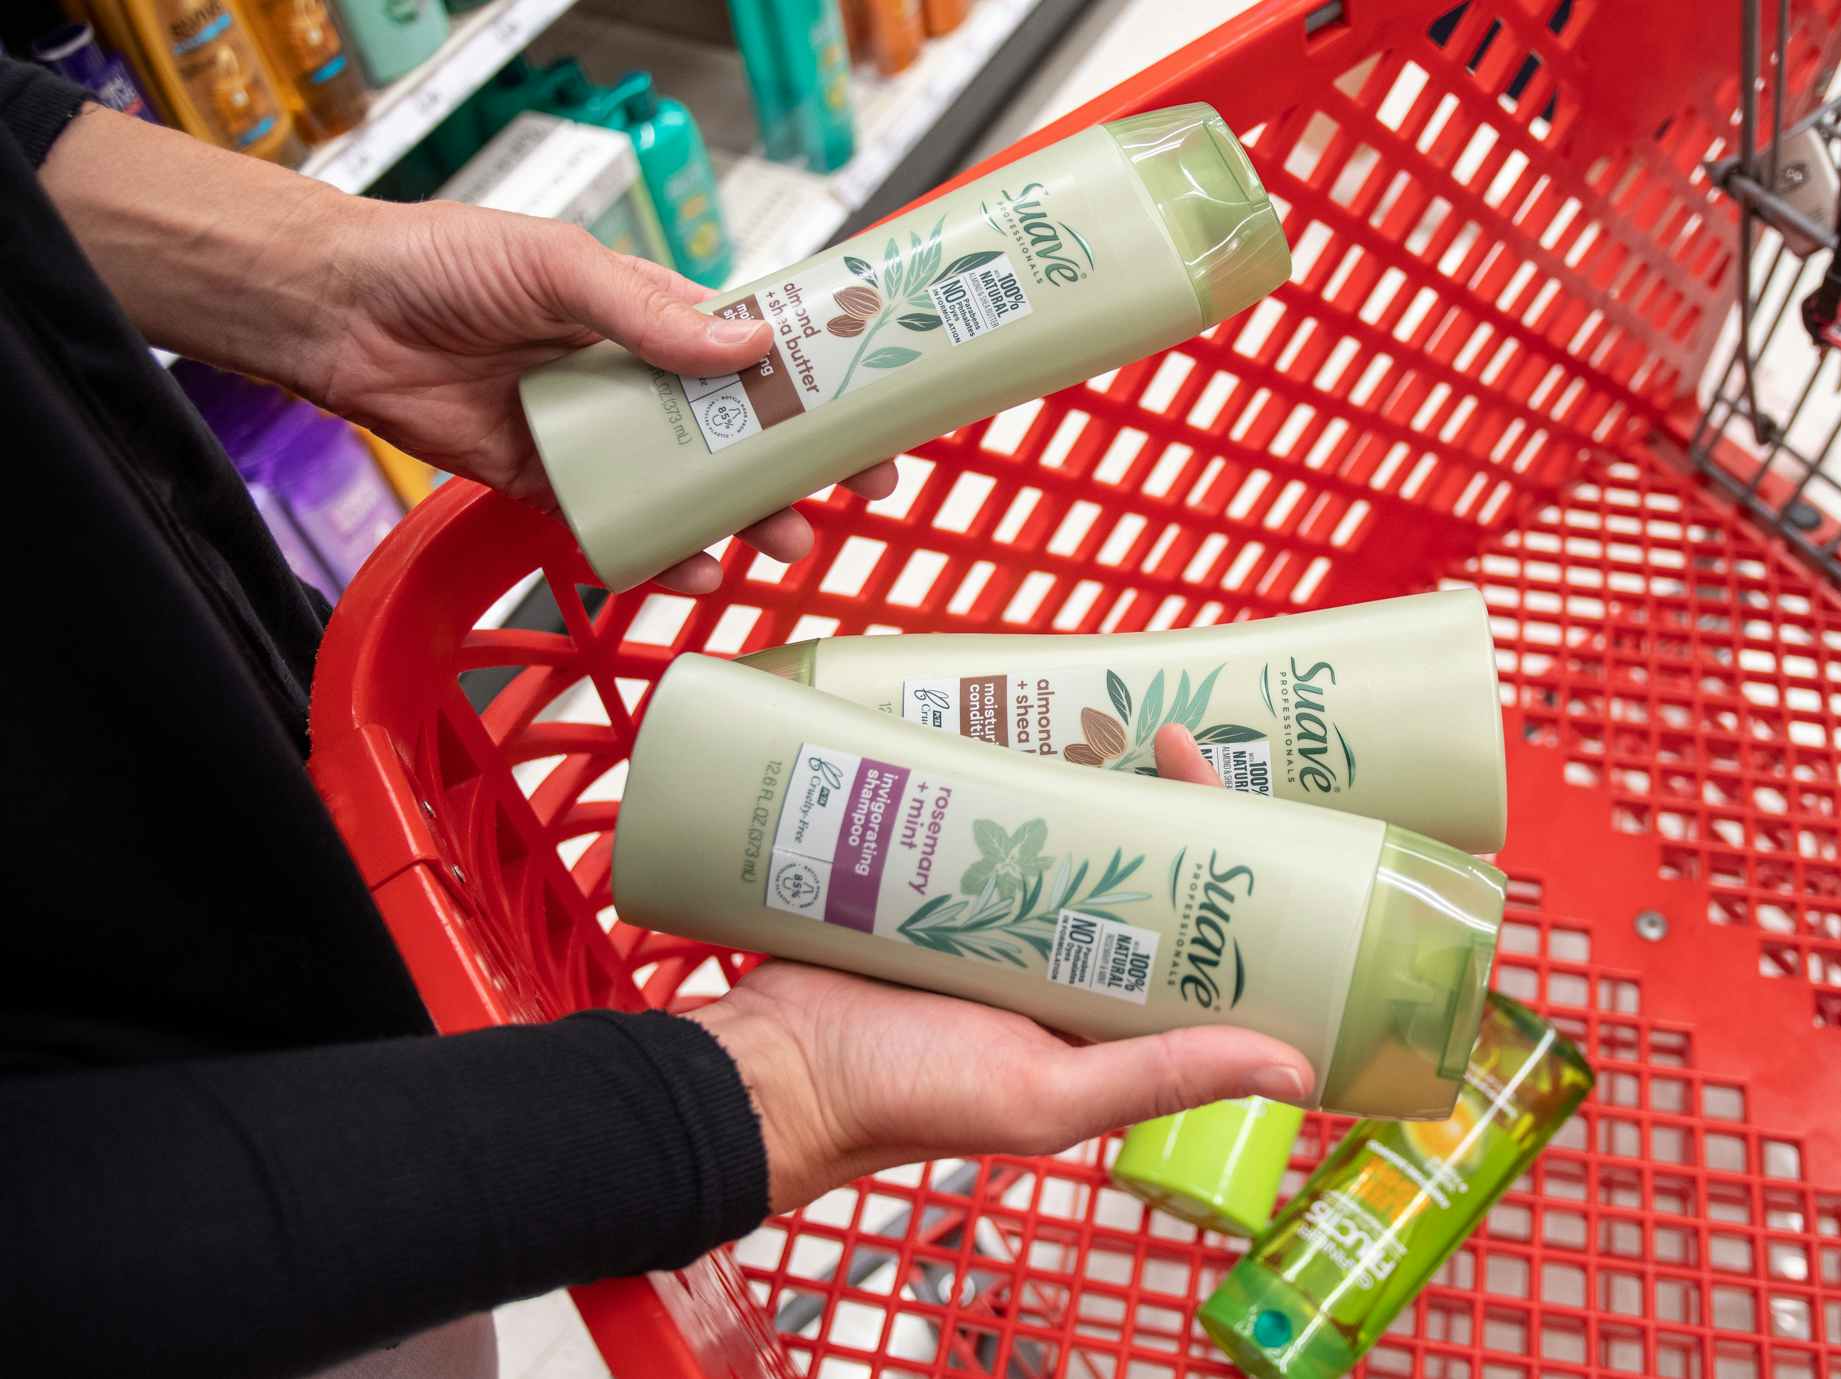 A person putting some Suave haircare products into a Target shopping cart